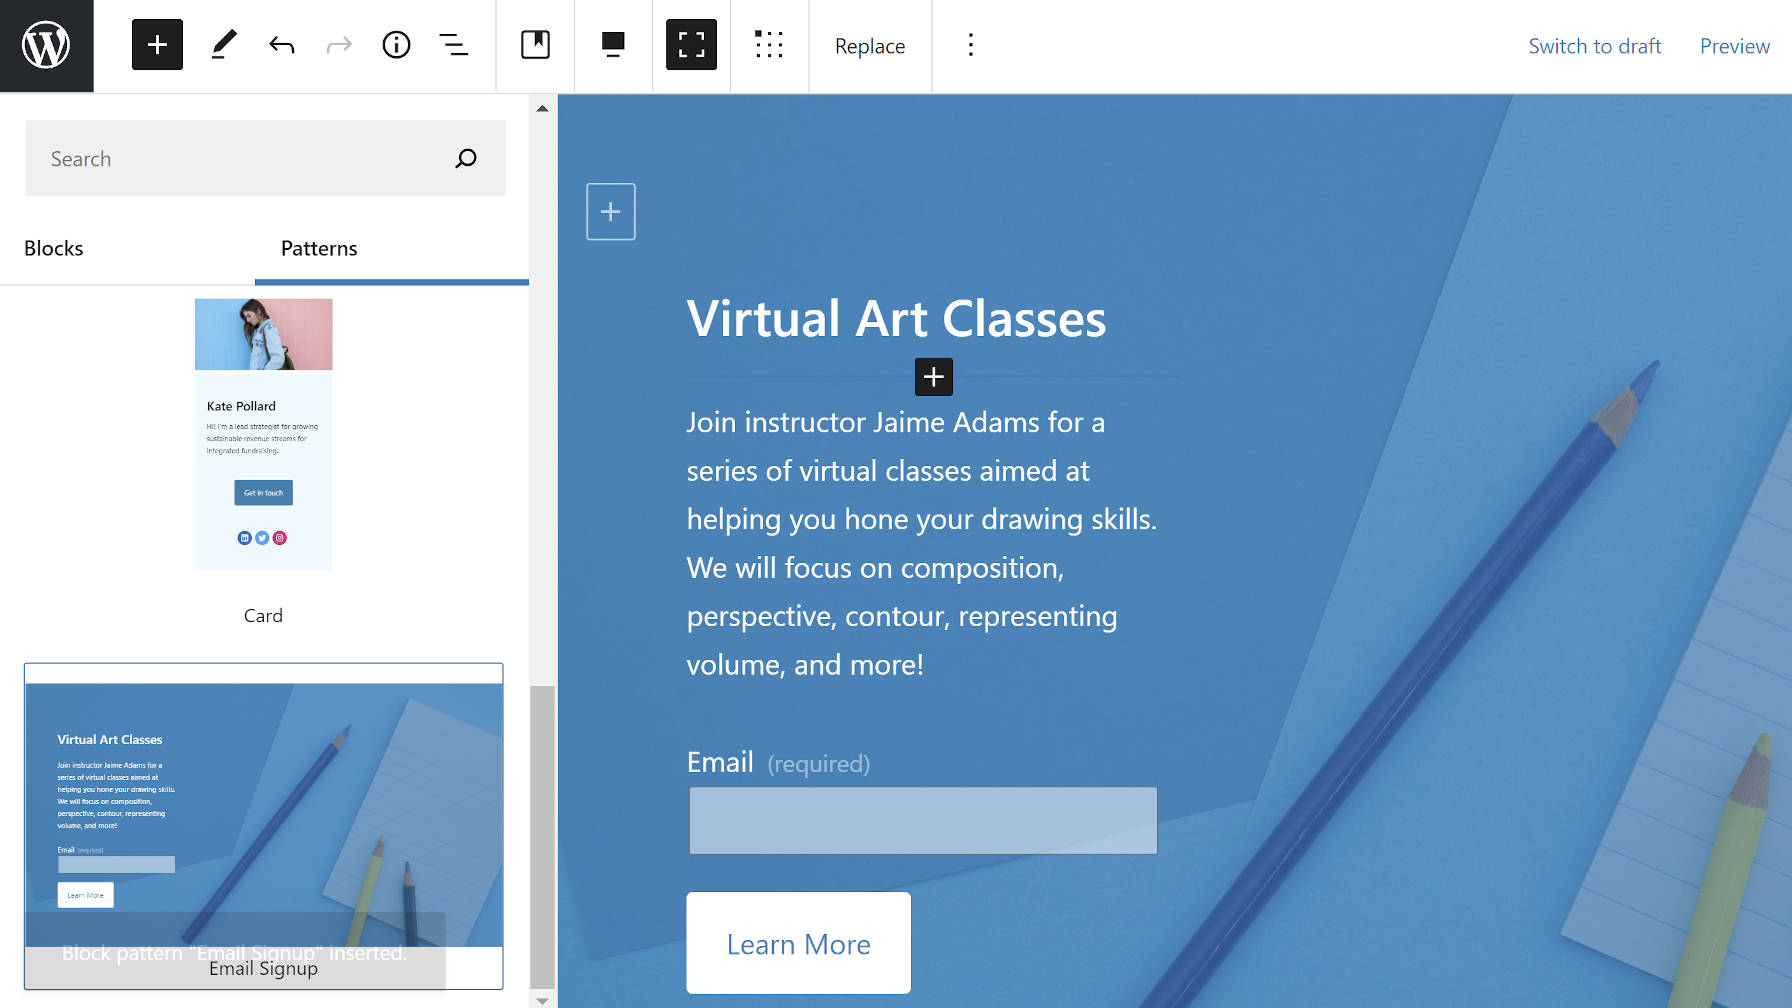 Automattic Launches the Blank Canvas WordPress Theme for Building Single-Page Websites